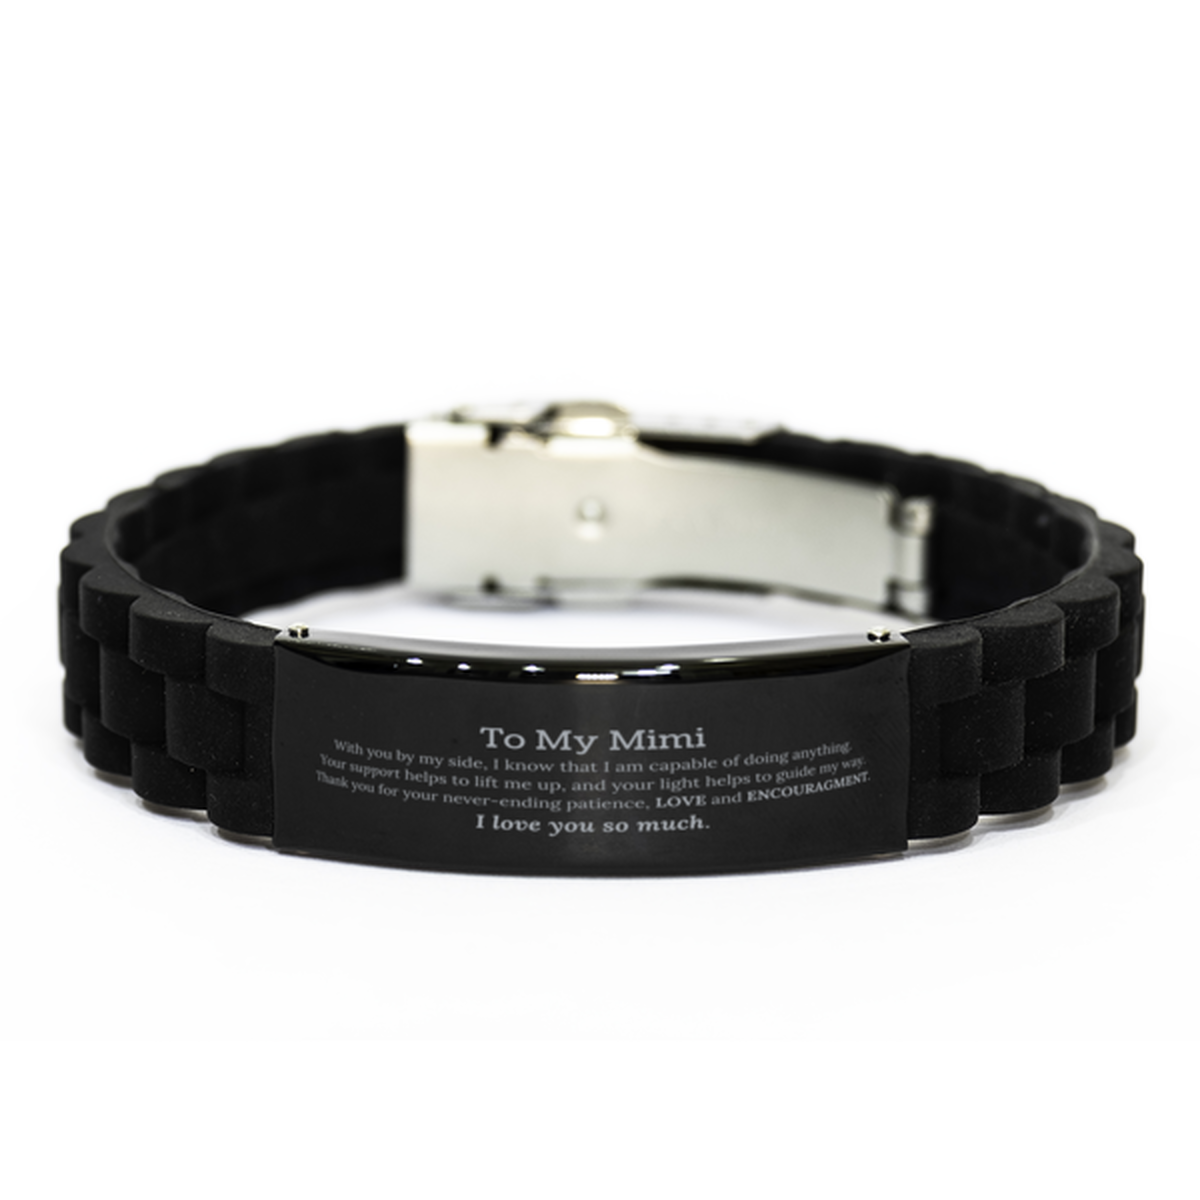 Appreciation Mimi Black Glidelock Clasp Bracelet Gifts, To My Mimi Birthday Christmas Wedding Keepsake Gifts for Mimi With you by my side, I know that I am capable of doing anything. I love you so much